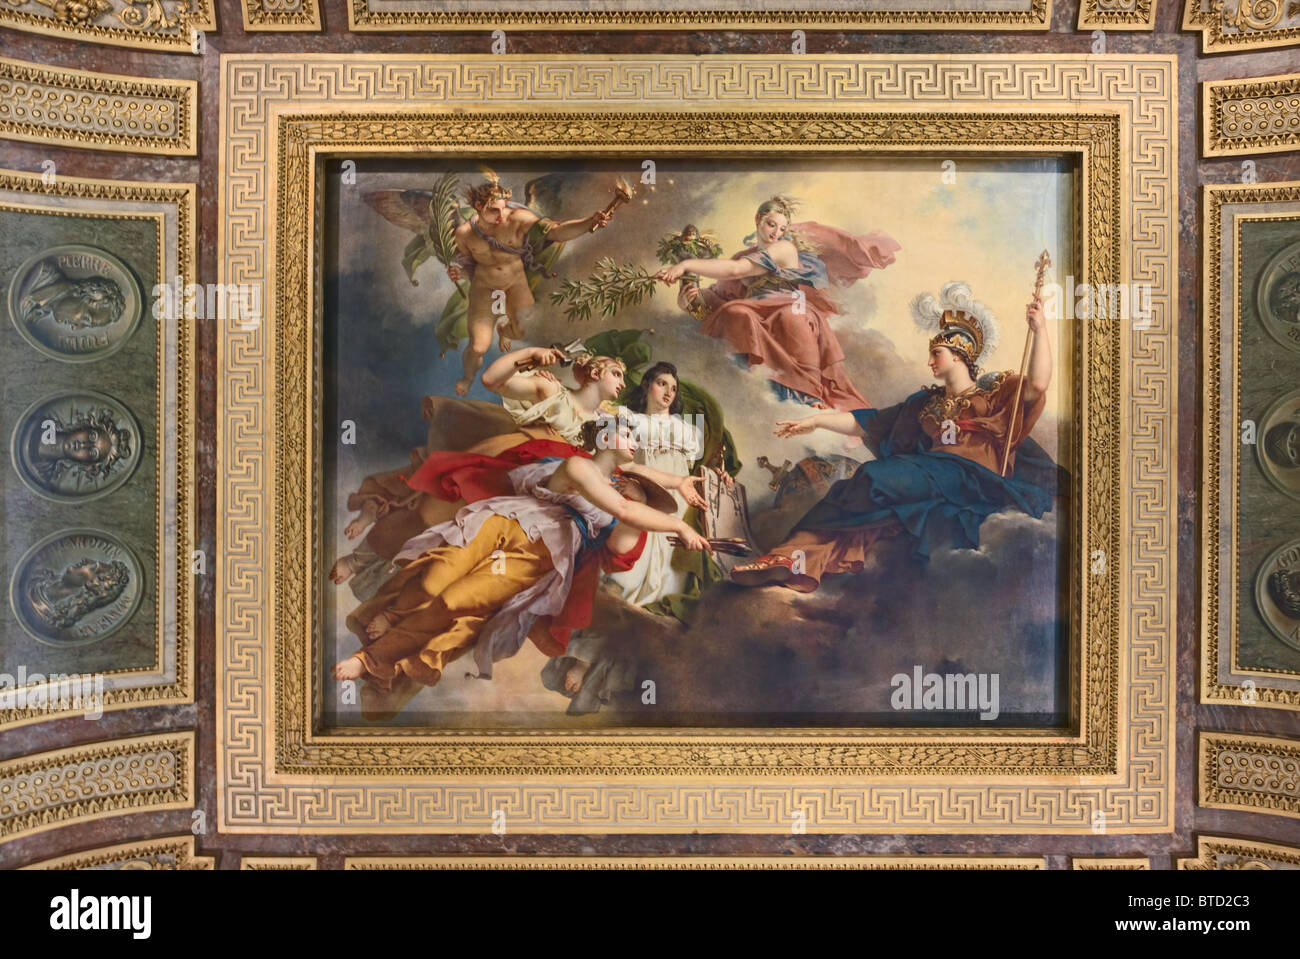 Louvre Ceiling Stock Photos Louvre Ceiling Stock Images Alamy